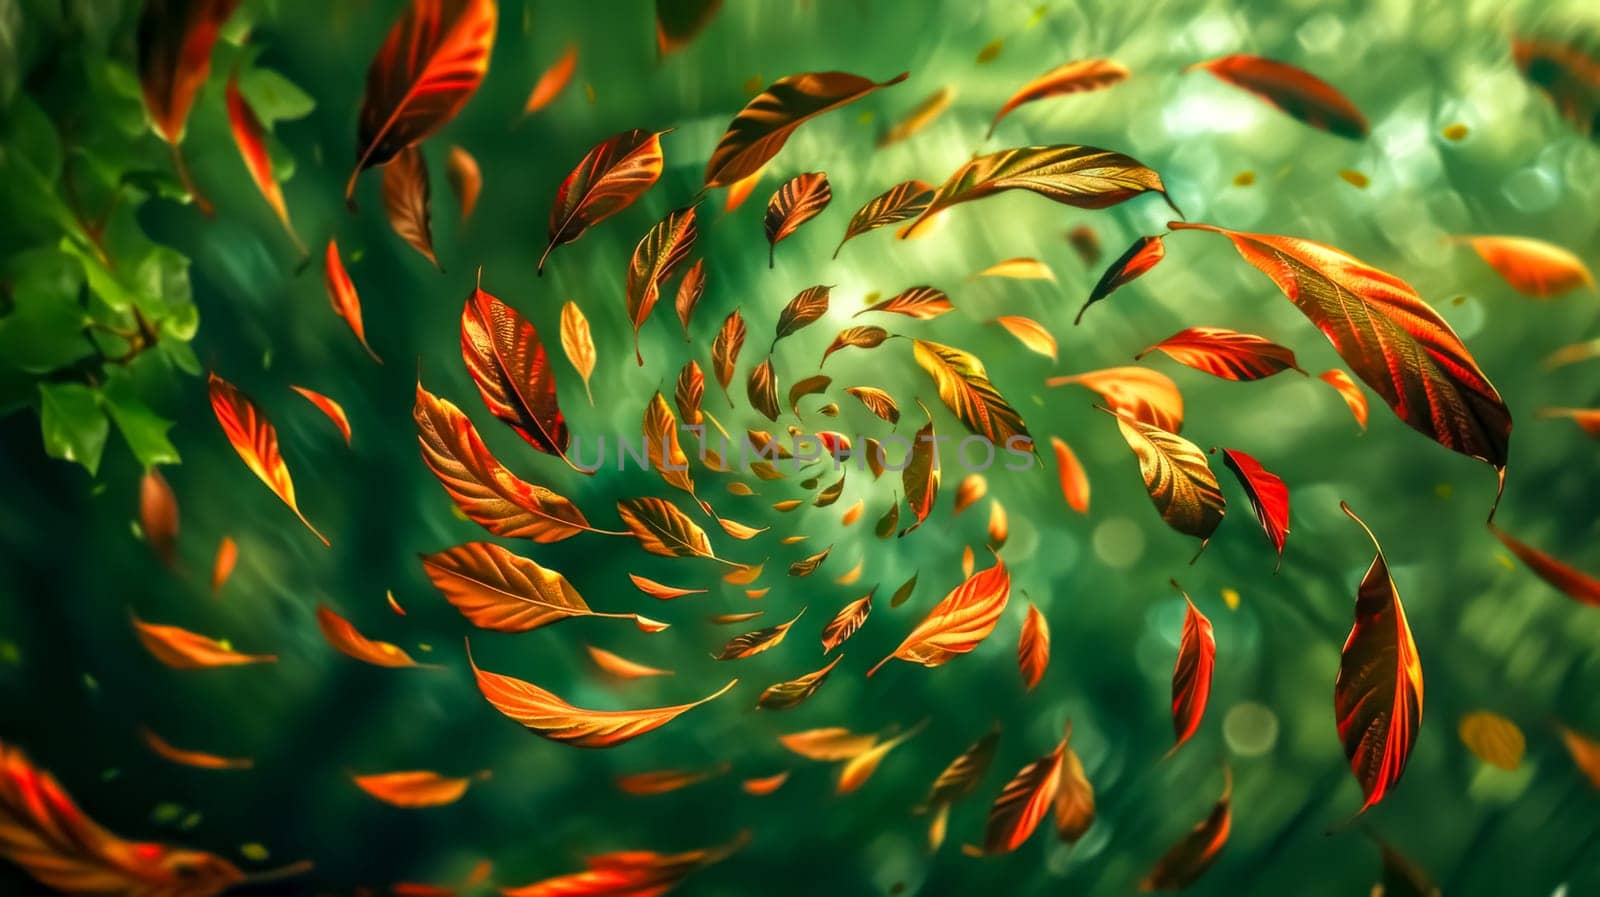 Digital artwork with swirling autumn leaves in a vibrant, spiraling pattern